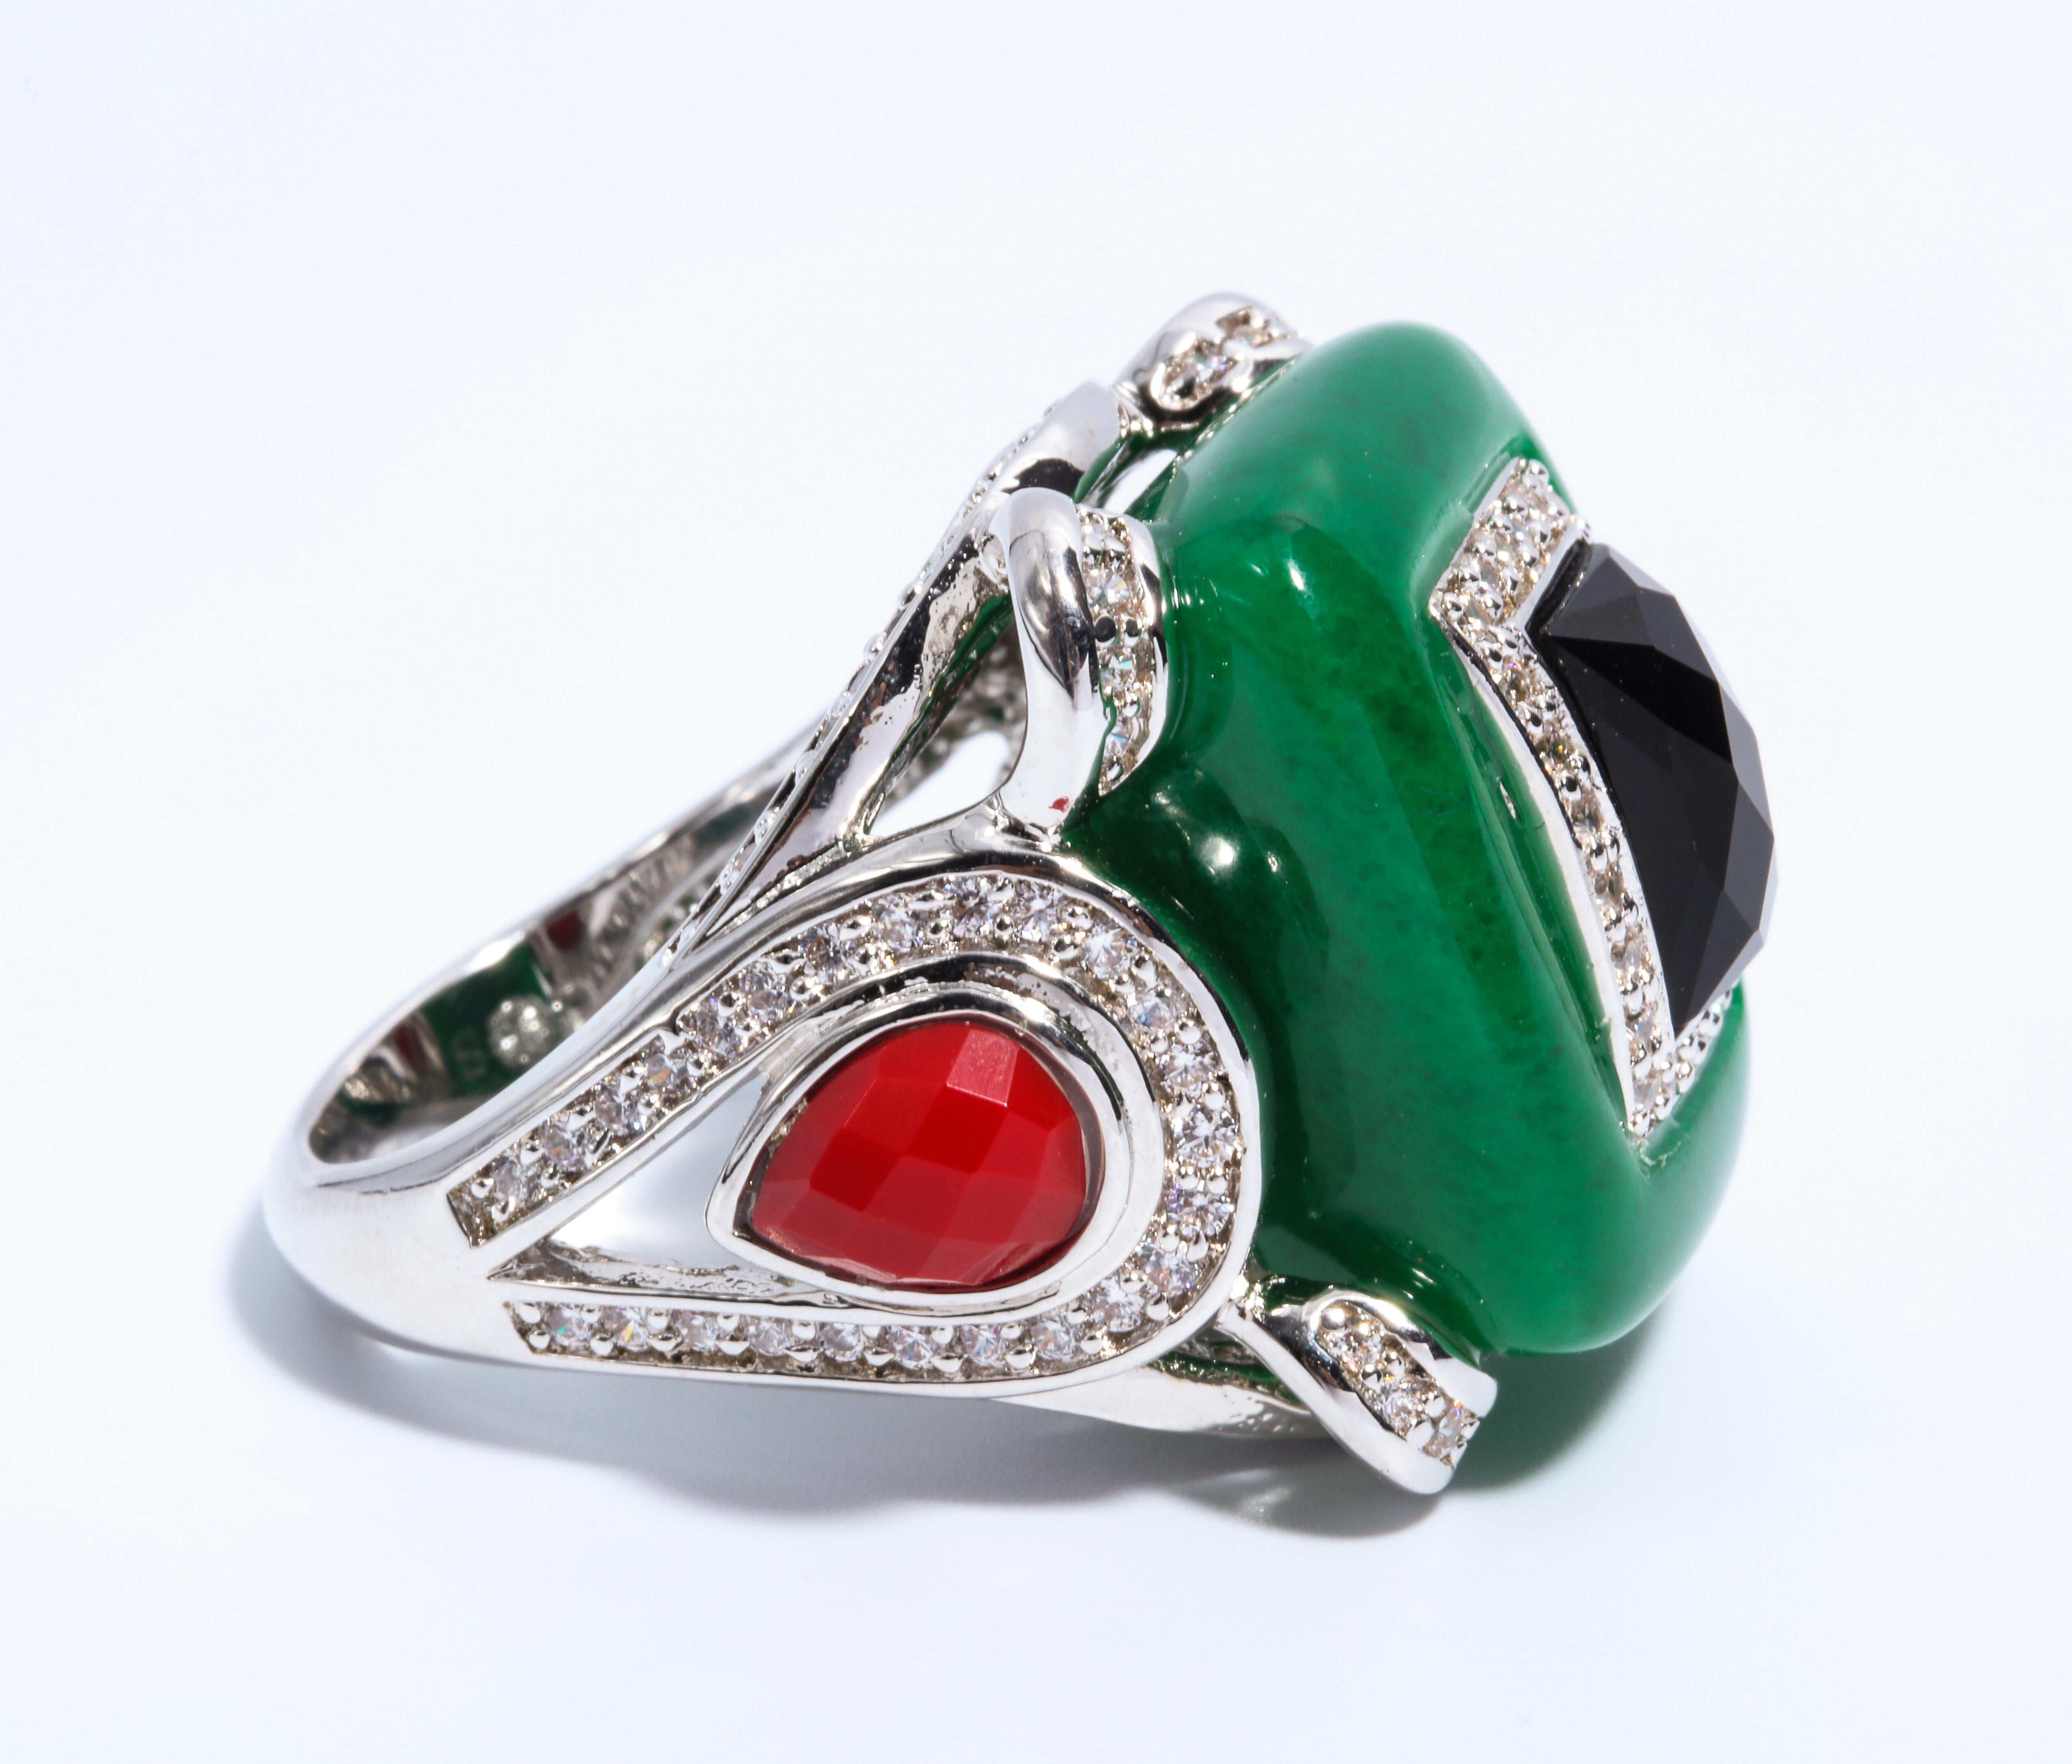 Women's Art Deco Style Faux Jade Onyx Coral  Cubic Zirconia Large Statement Ring